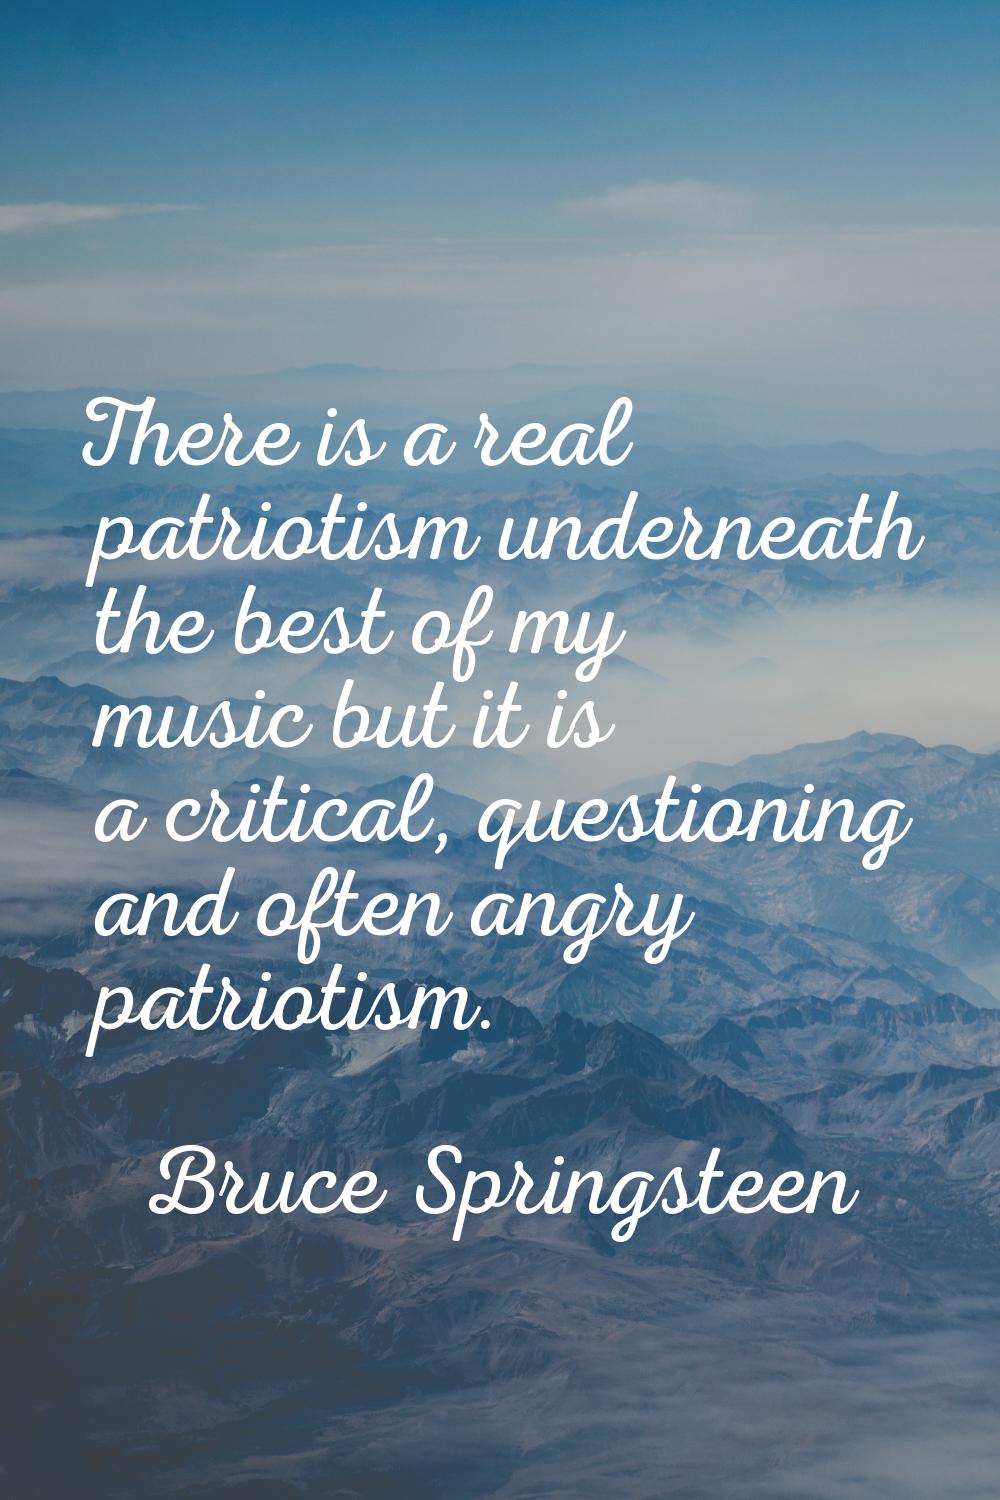 There is a real patriotism underneath the best of my music but it is a critical, questioning and of